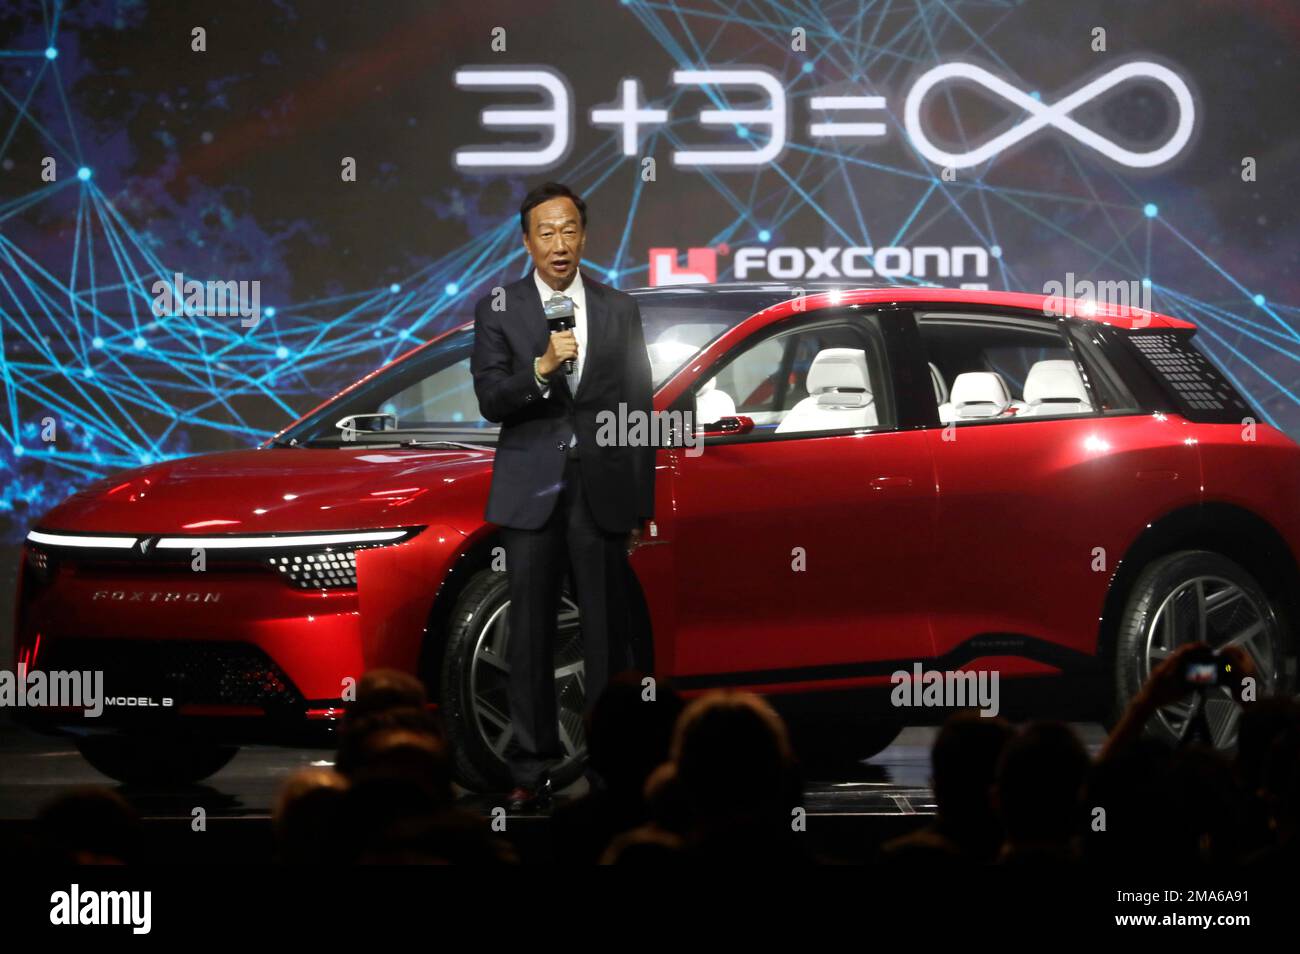 Foxconn founder Terry Gou delivers a speech in front of the Model B electric car during the 2022 Hon Hai Tech Day (HHTD 22) at the Nangang Exhibition Center in Taipei, Taiwan, Tuesday, Oct. 18, 2022. (AP Photo/Chiang Ying-ying) Stockfoto